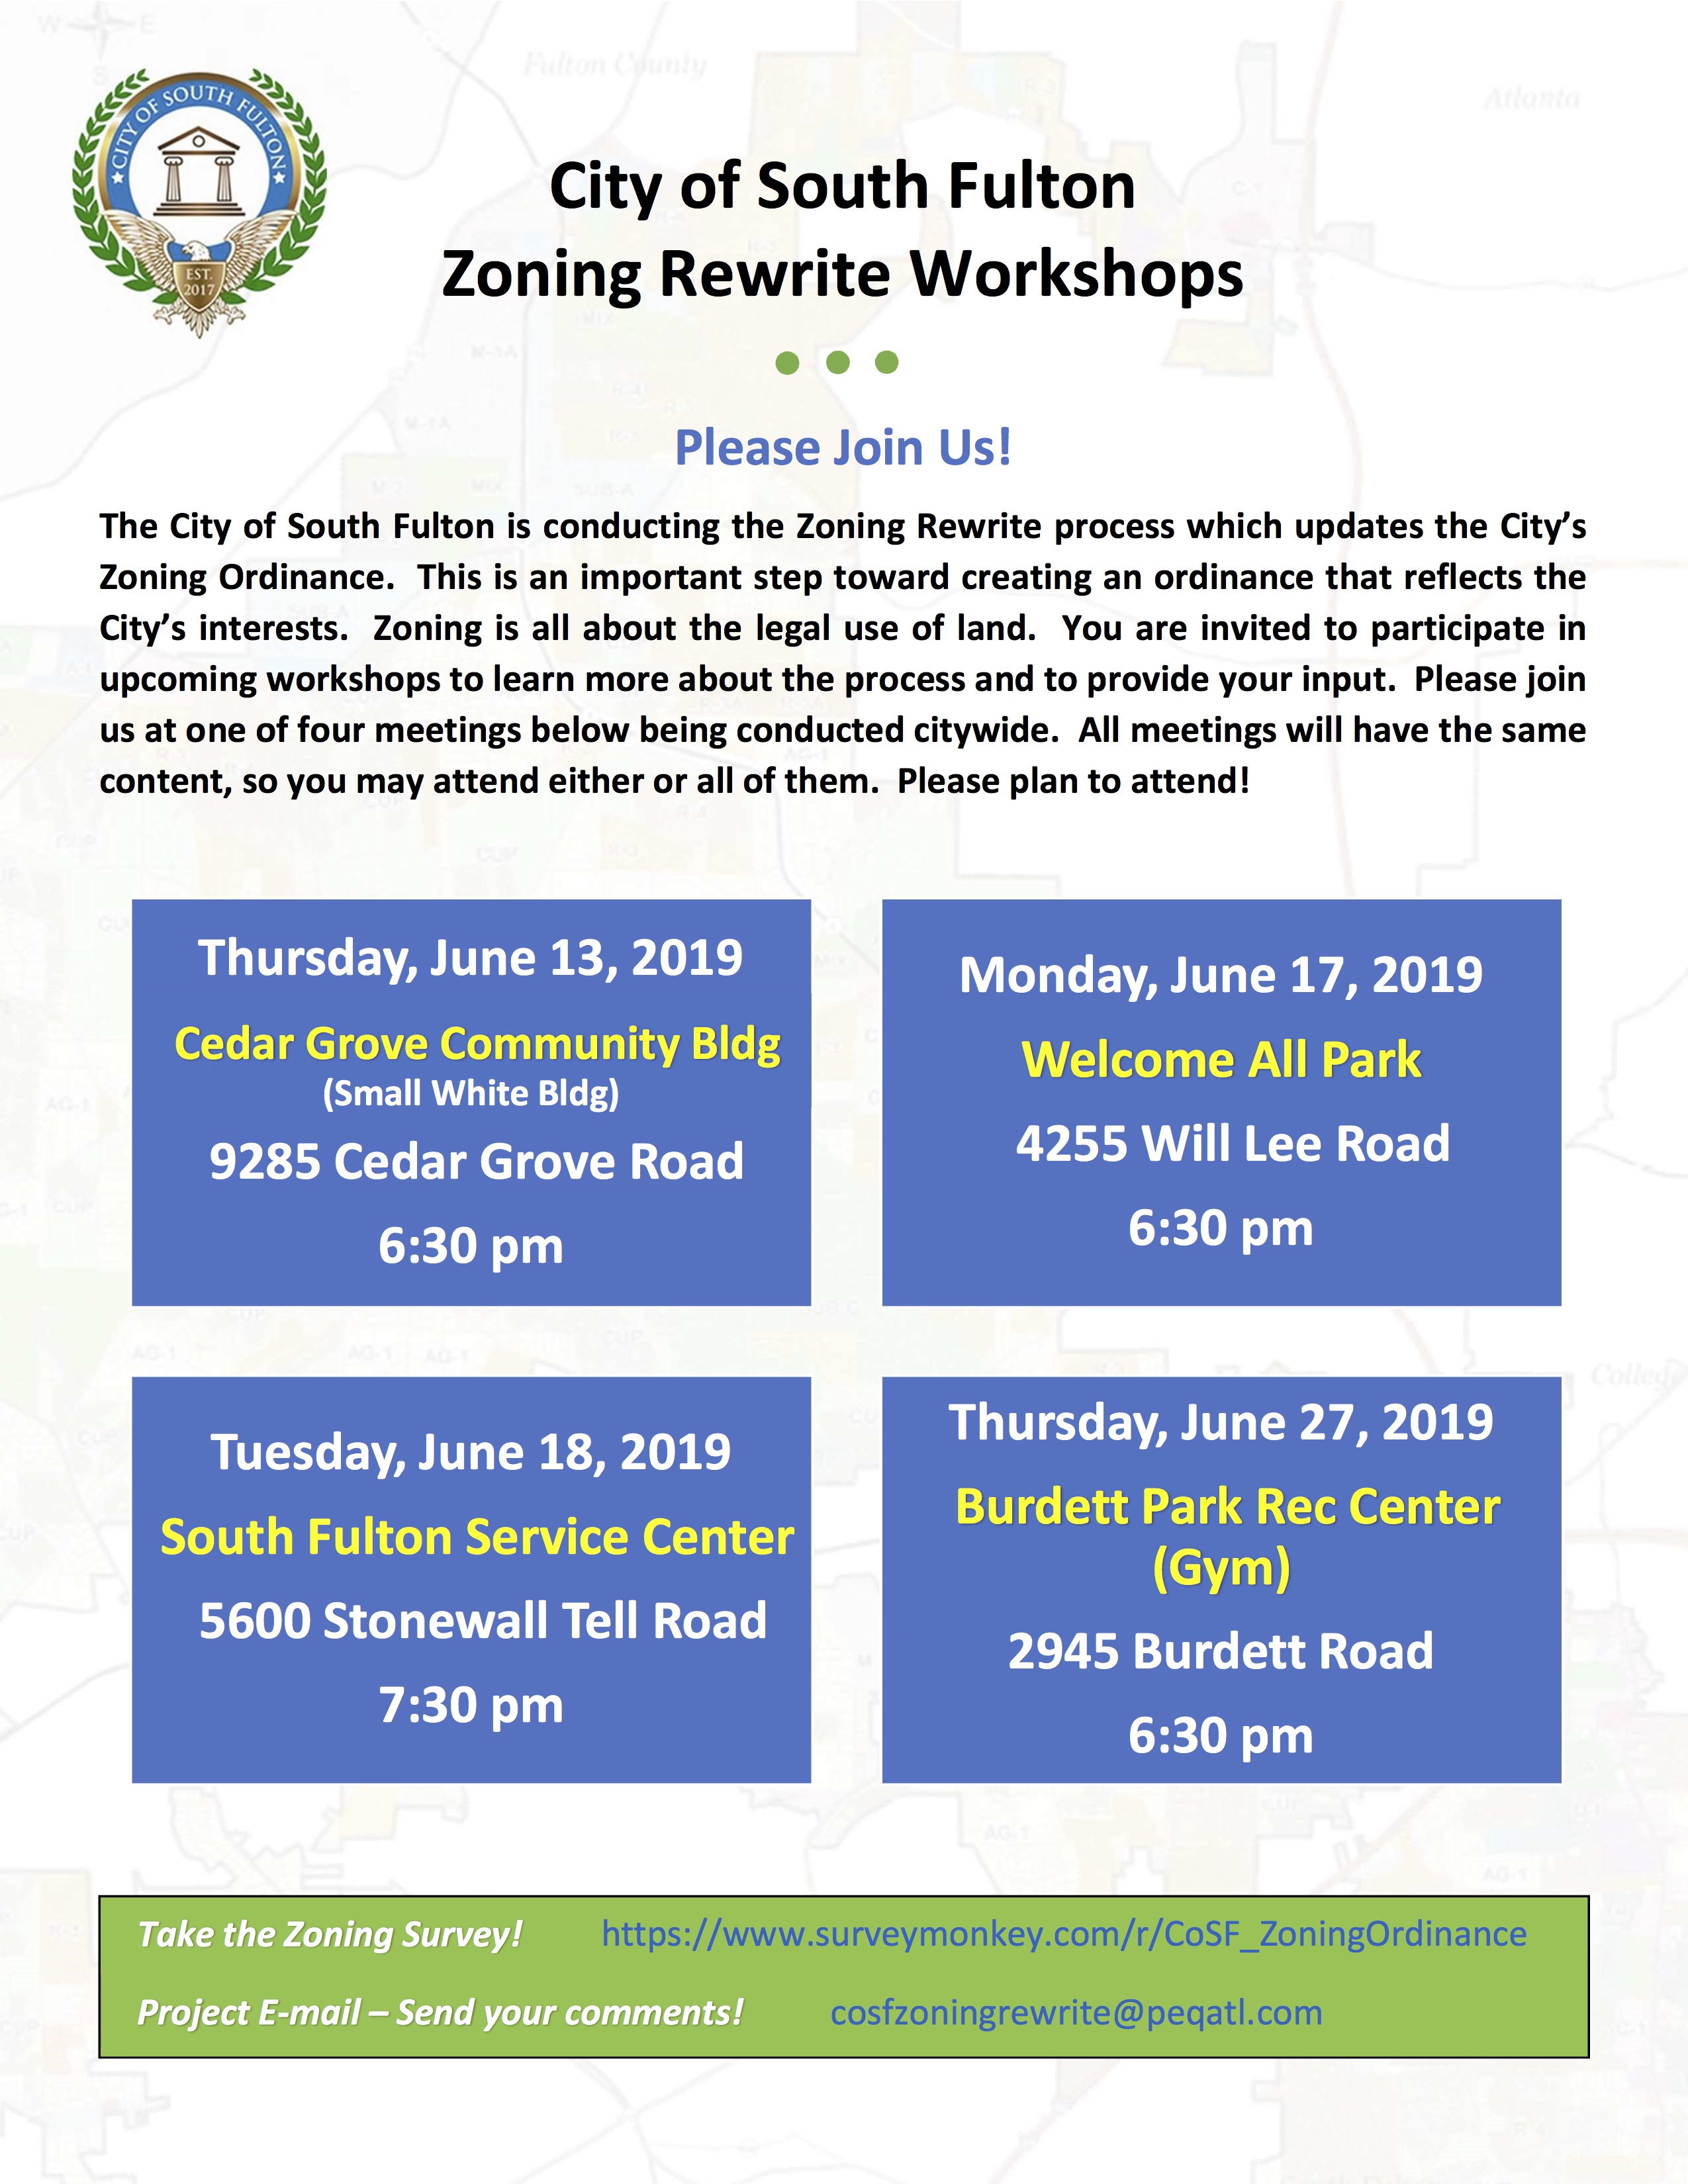 City of South Fulton Zoning Rewrite Workshop